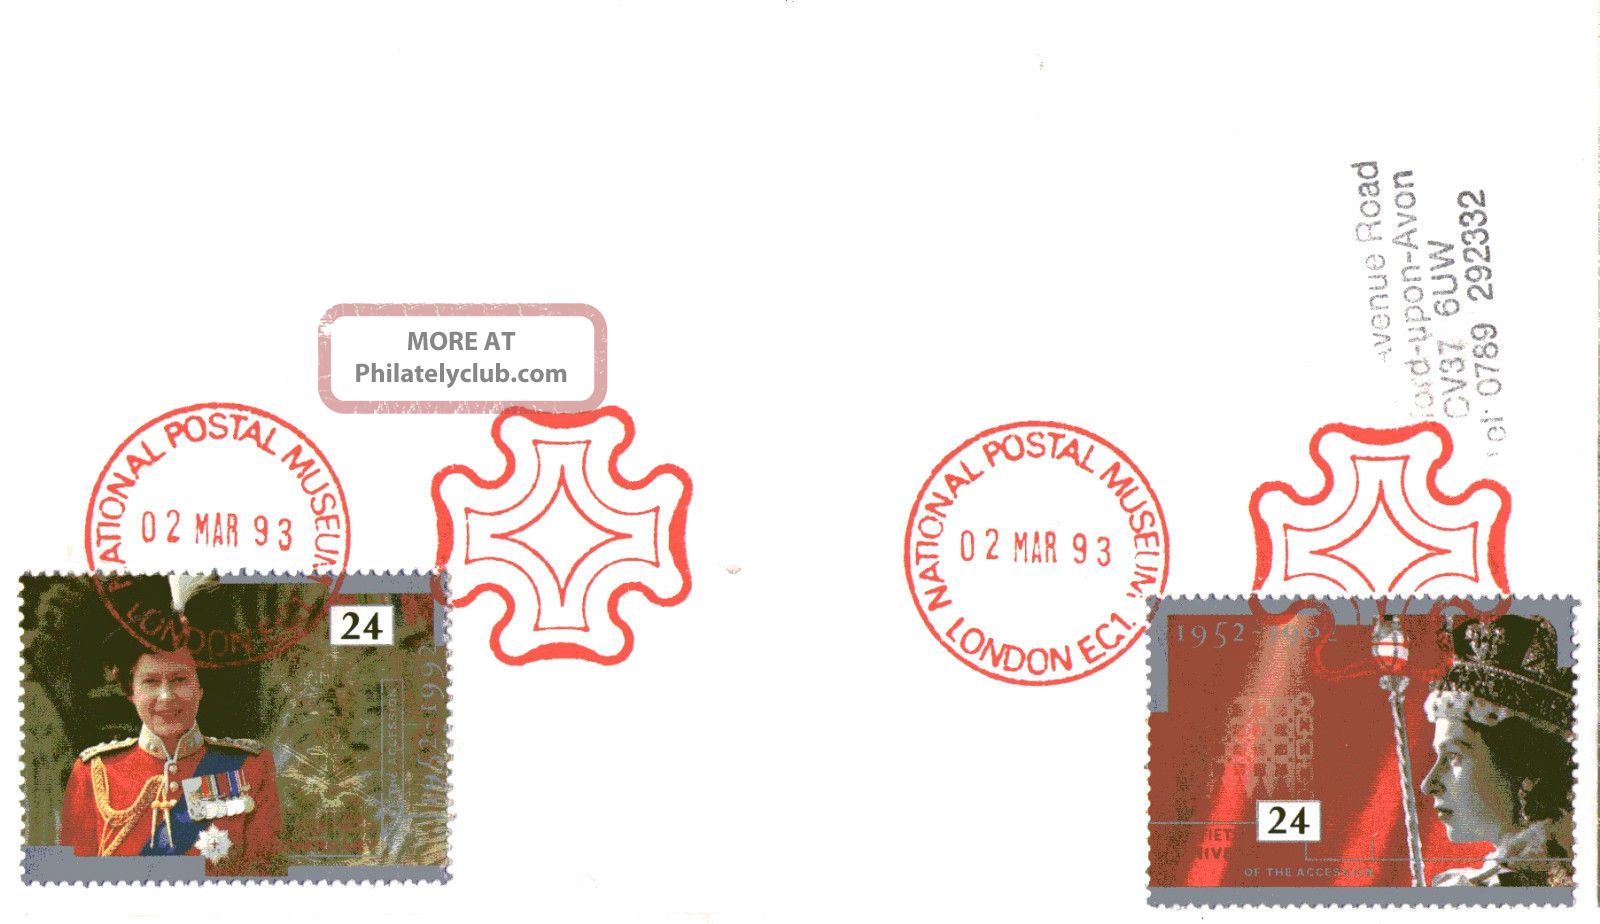 2 March 1993 Royalty Cover National Postal Museum Maltese Cross Shs Topical Stamps photo